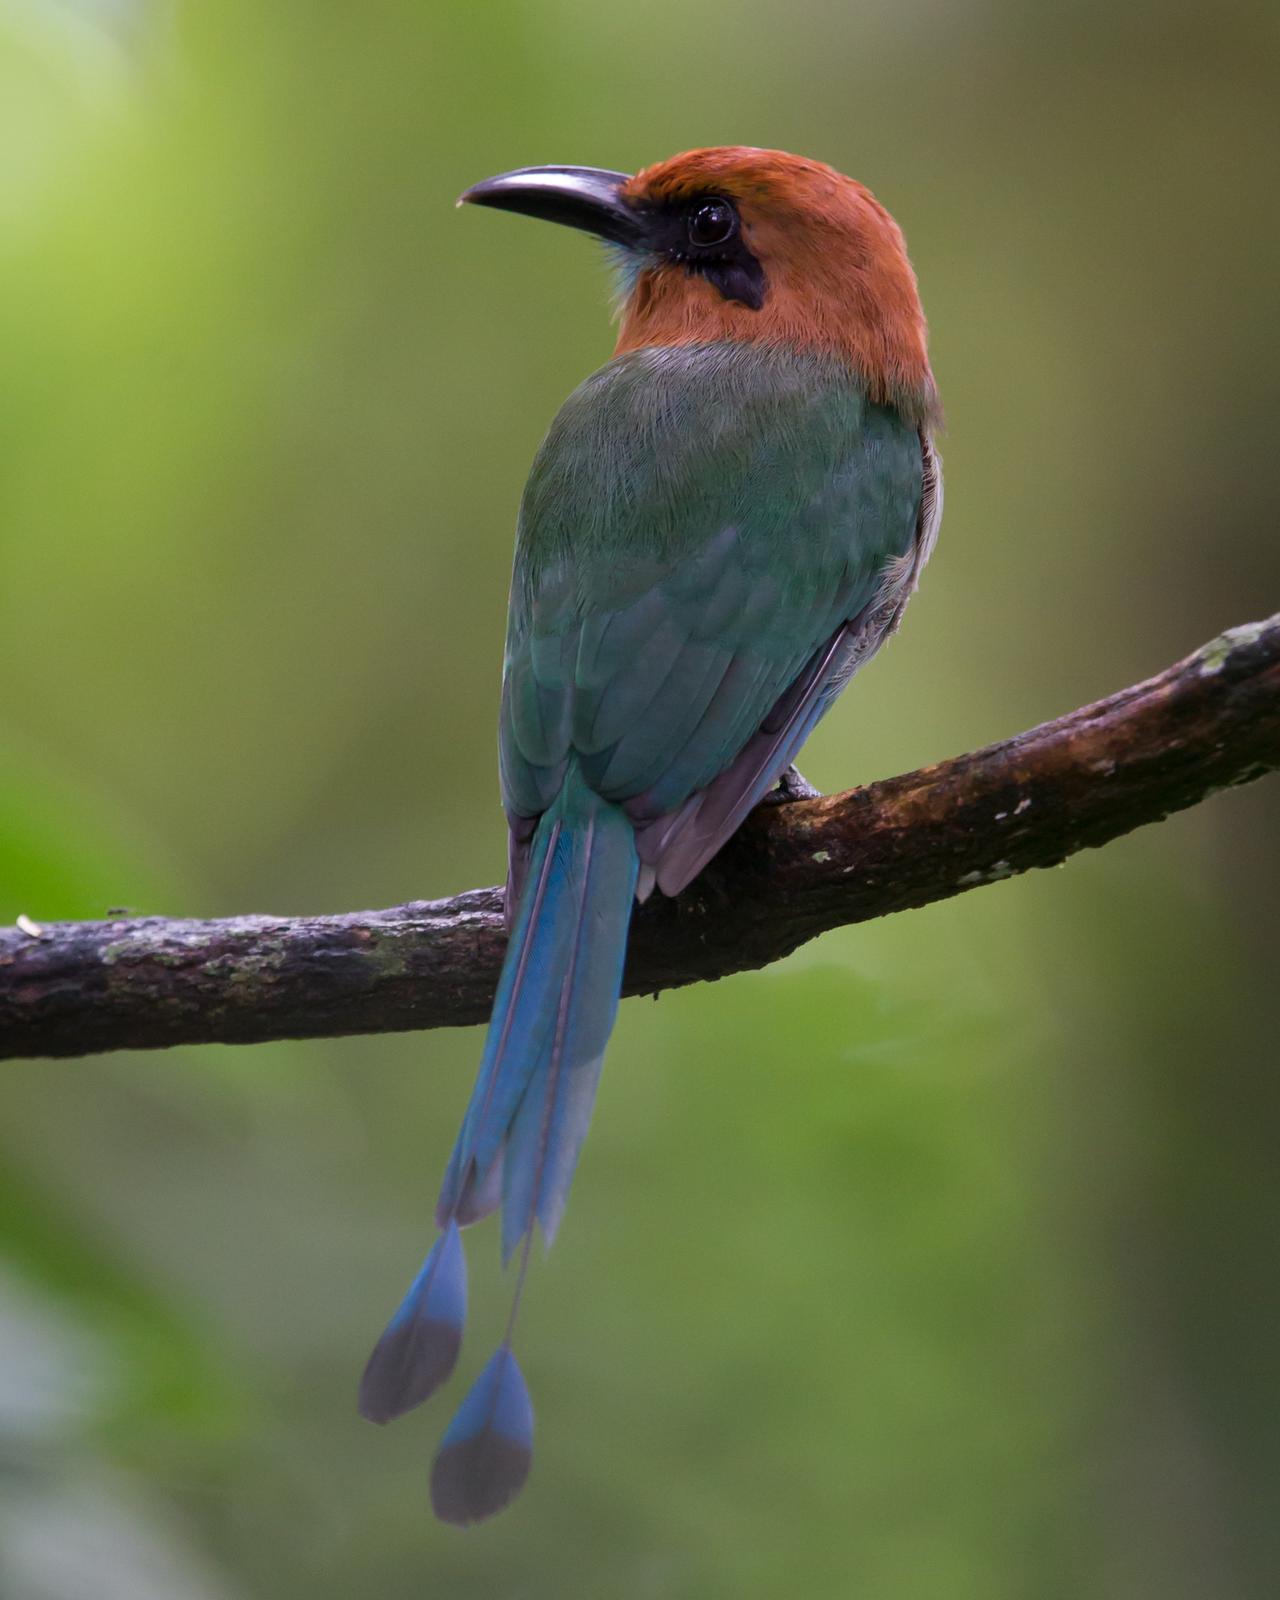 Broad-billed Motmot Photo by Kevin Berkoff